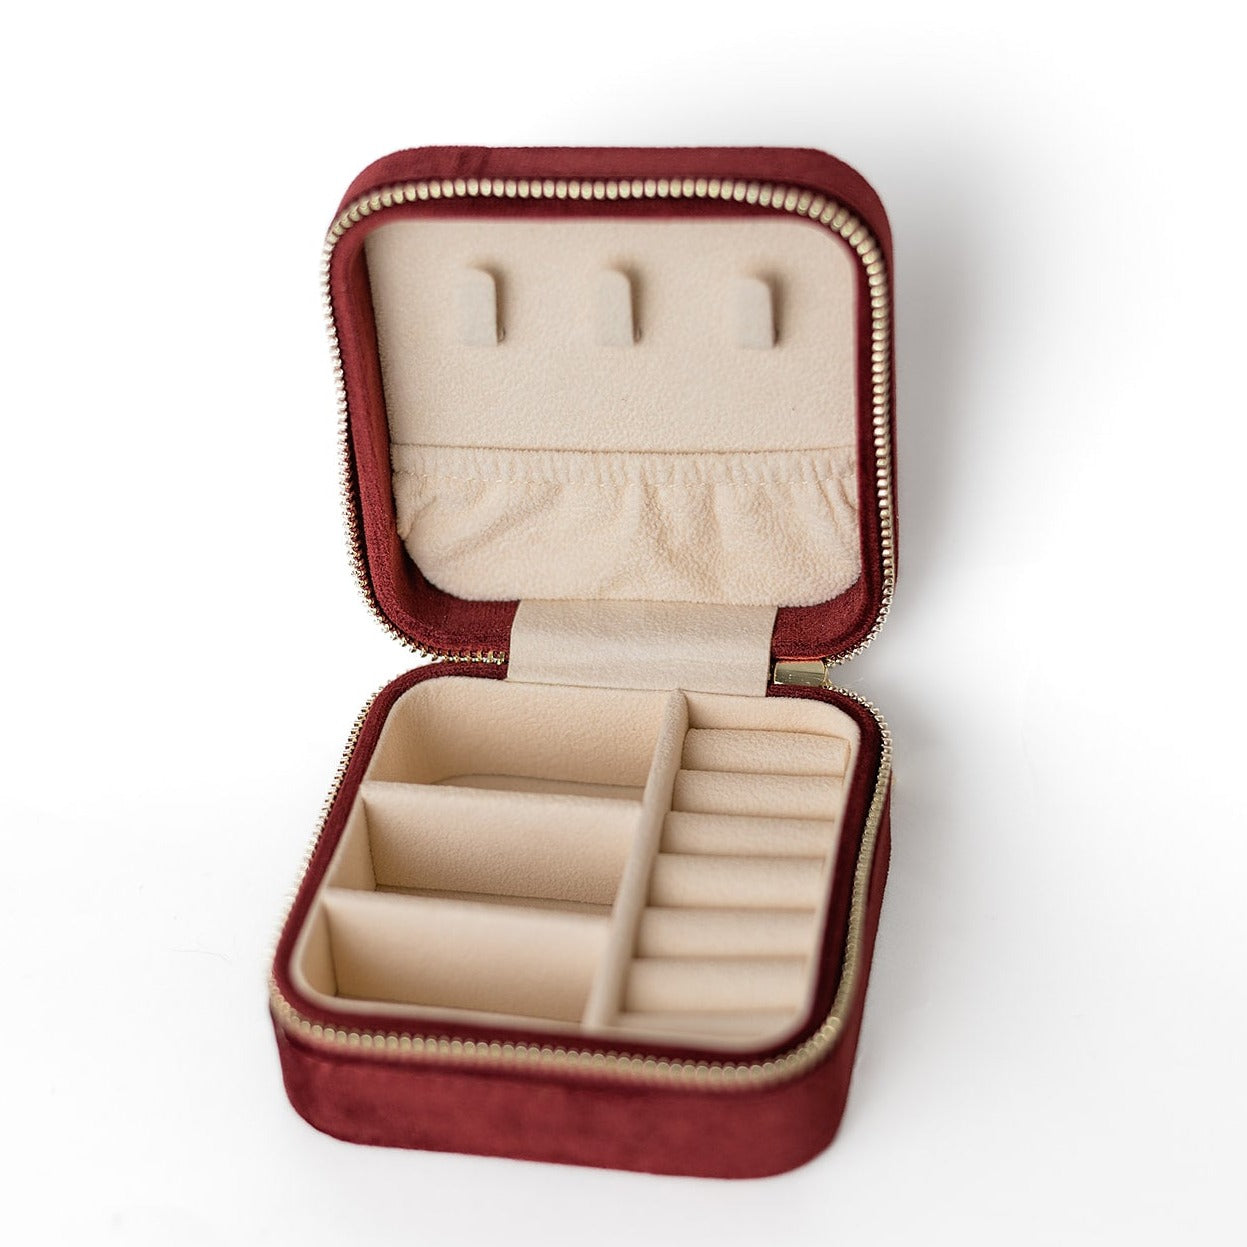 The inside of a merlot jewelry case. There are three storage sections and seven ring slots on the bottom portion of the case. On the top half, there are three hooks for chains or necklaces and well as a pouch to tuck them in.